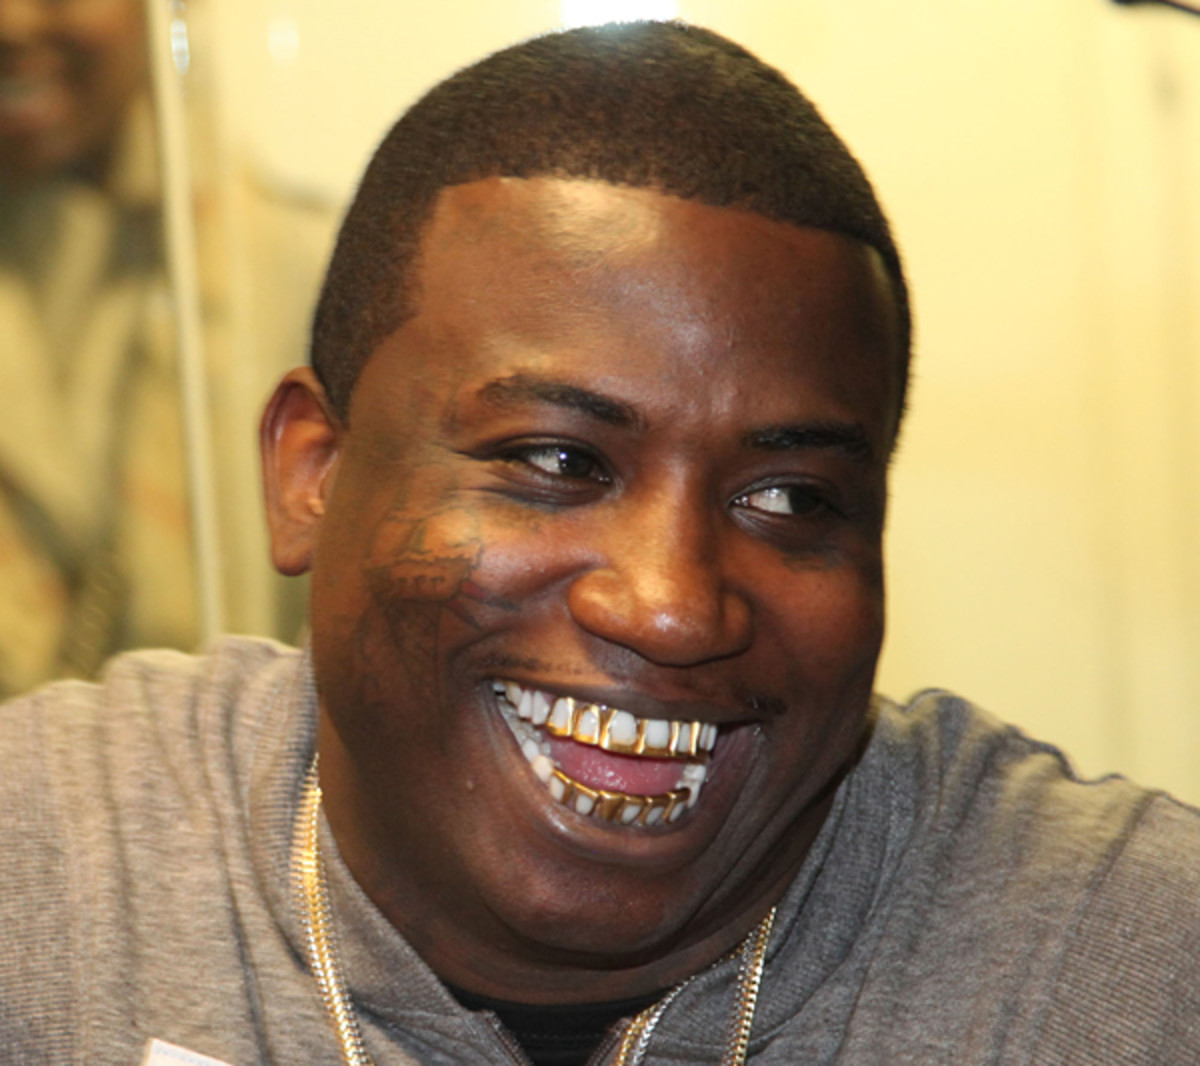 Gucci Mane On NASCAR, Making Movies And Why College Athletes